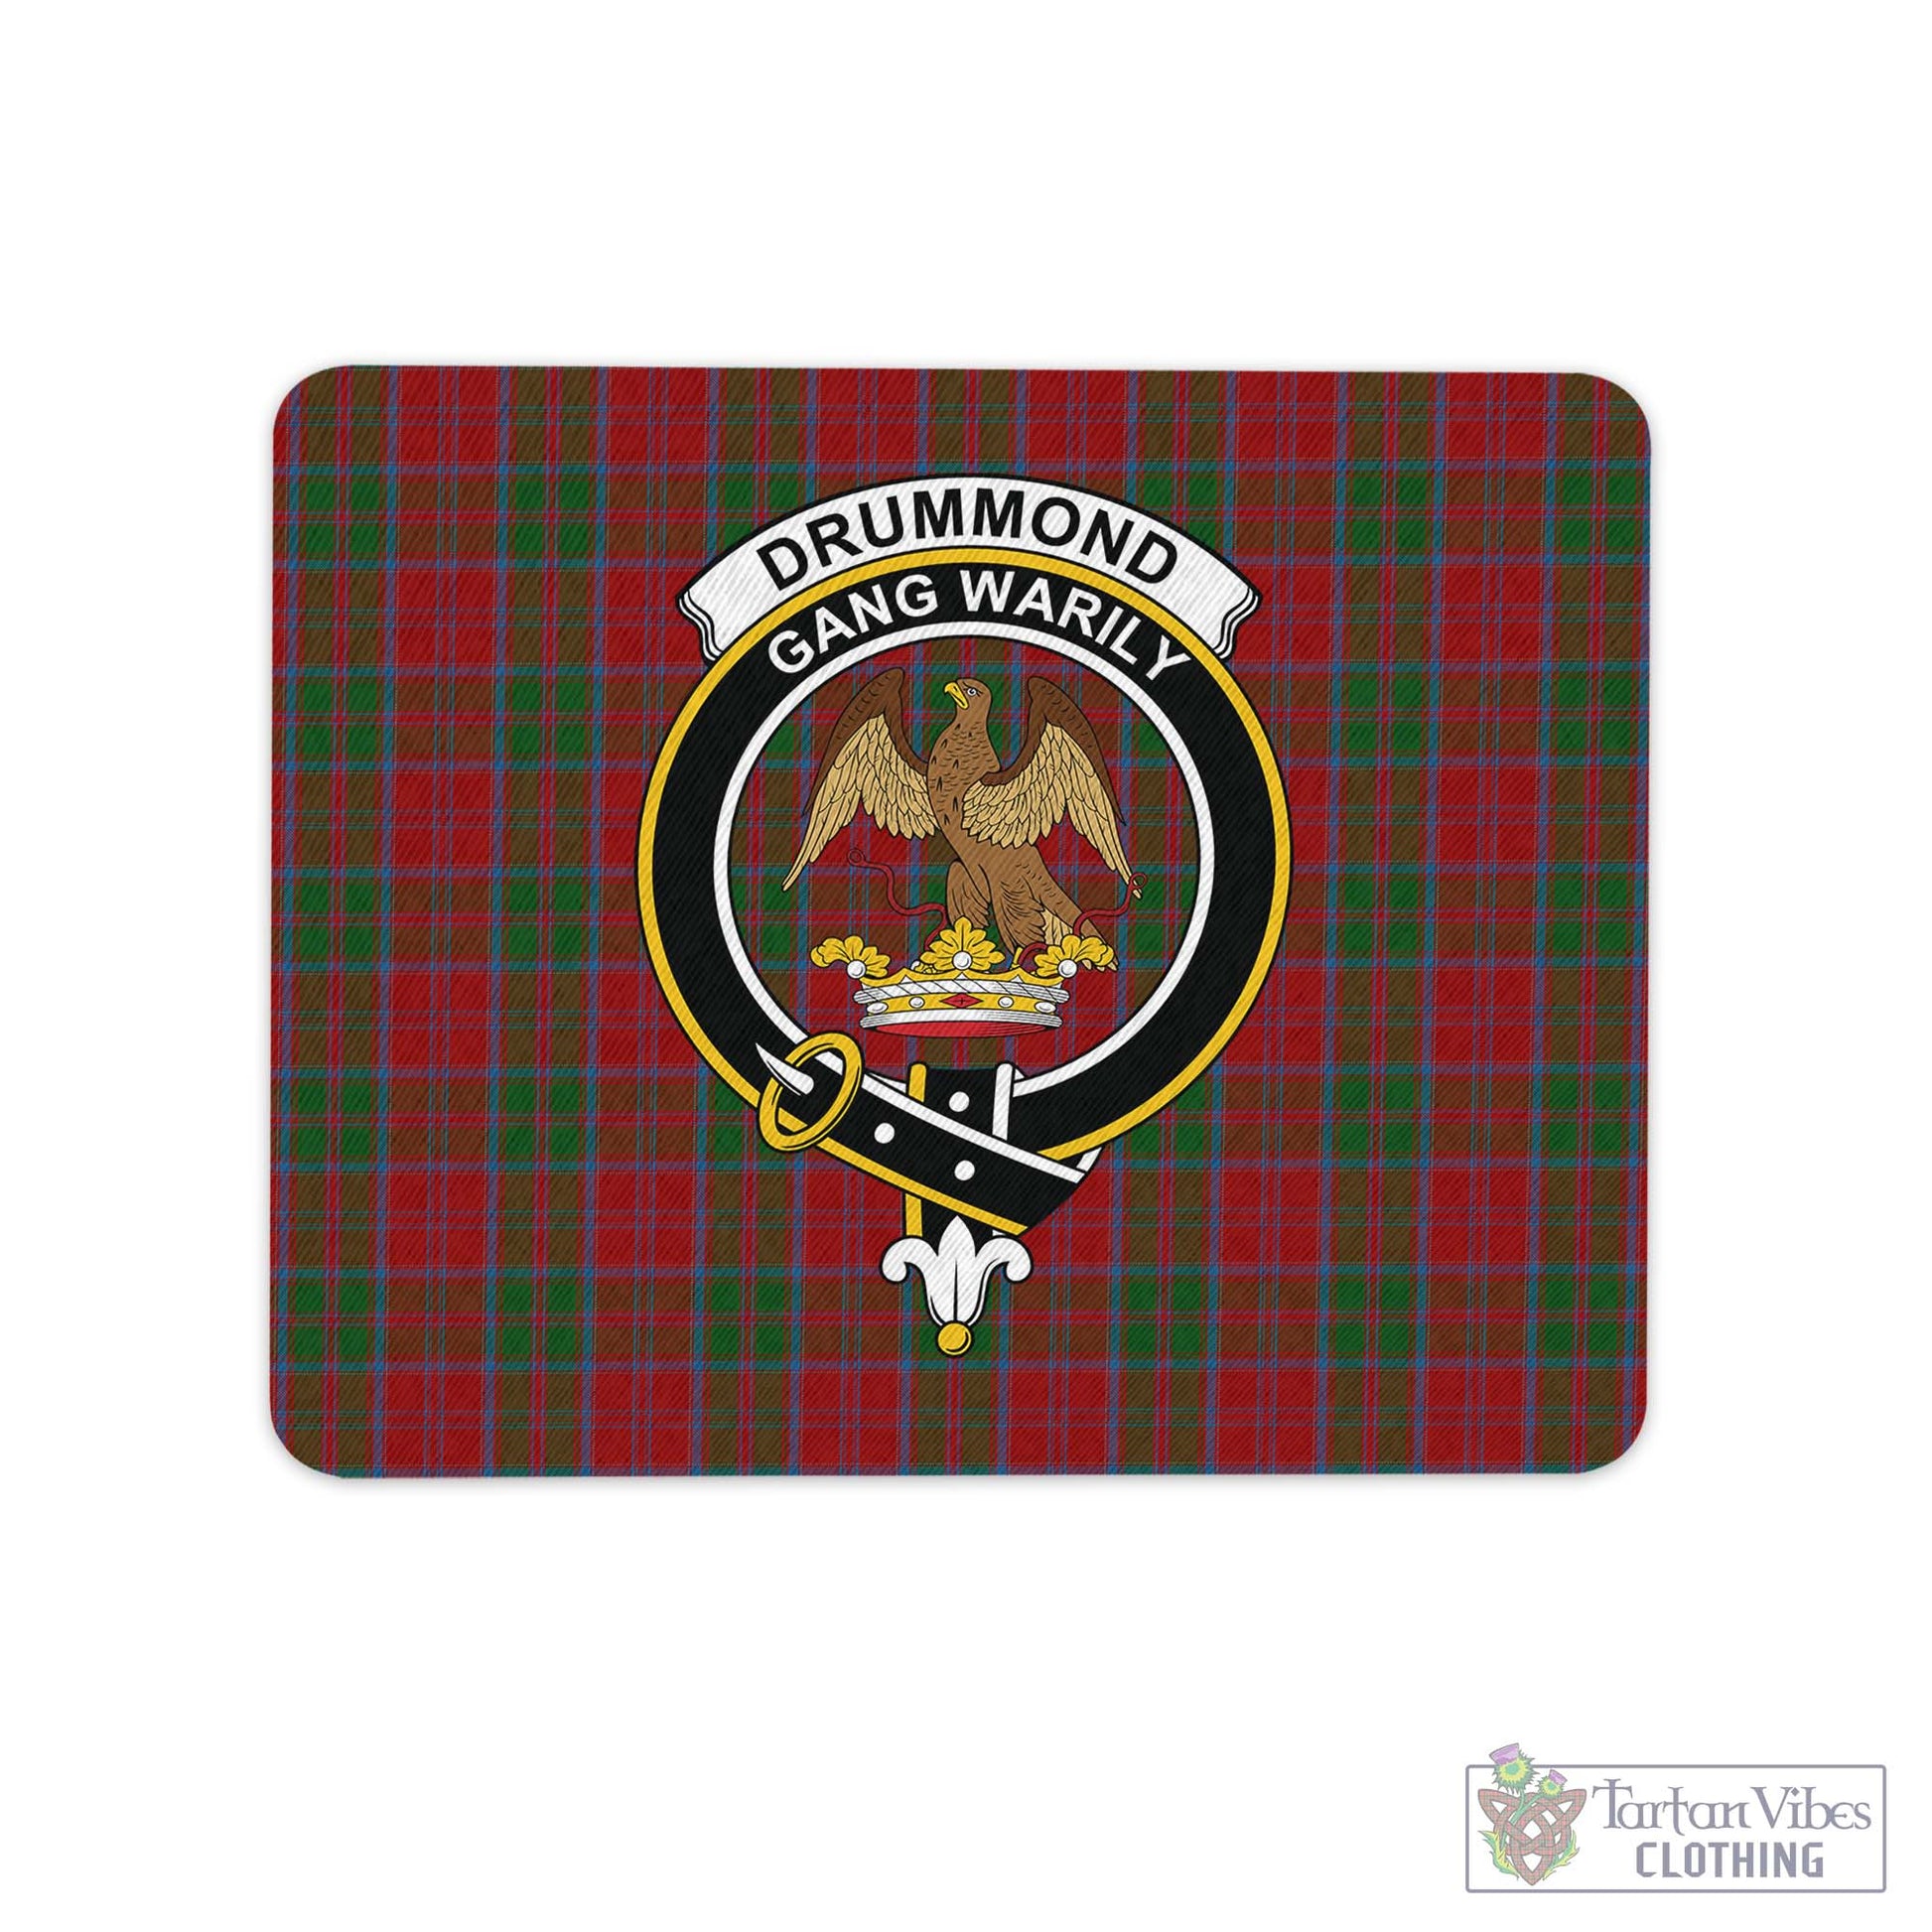 Tartan Vibes Clothing Drummond Tartan Mouse Pad with Family Crest